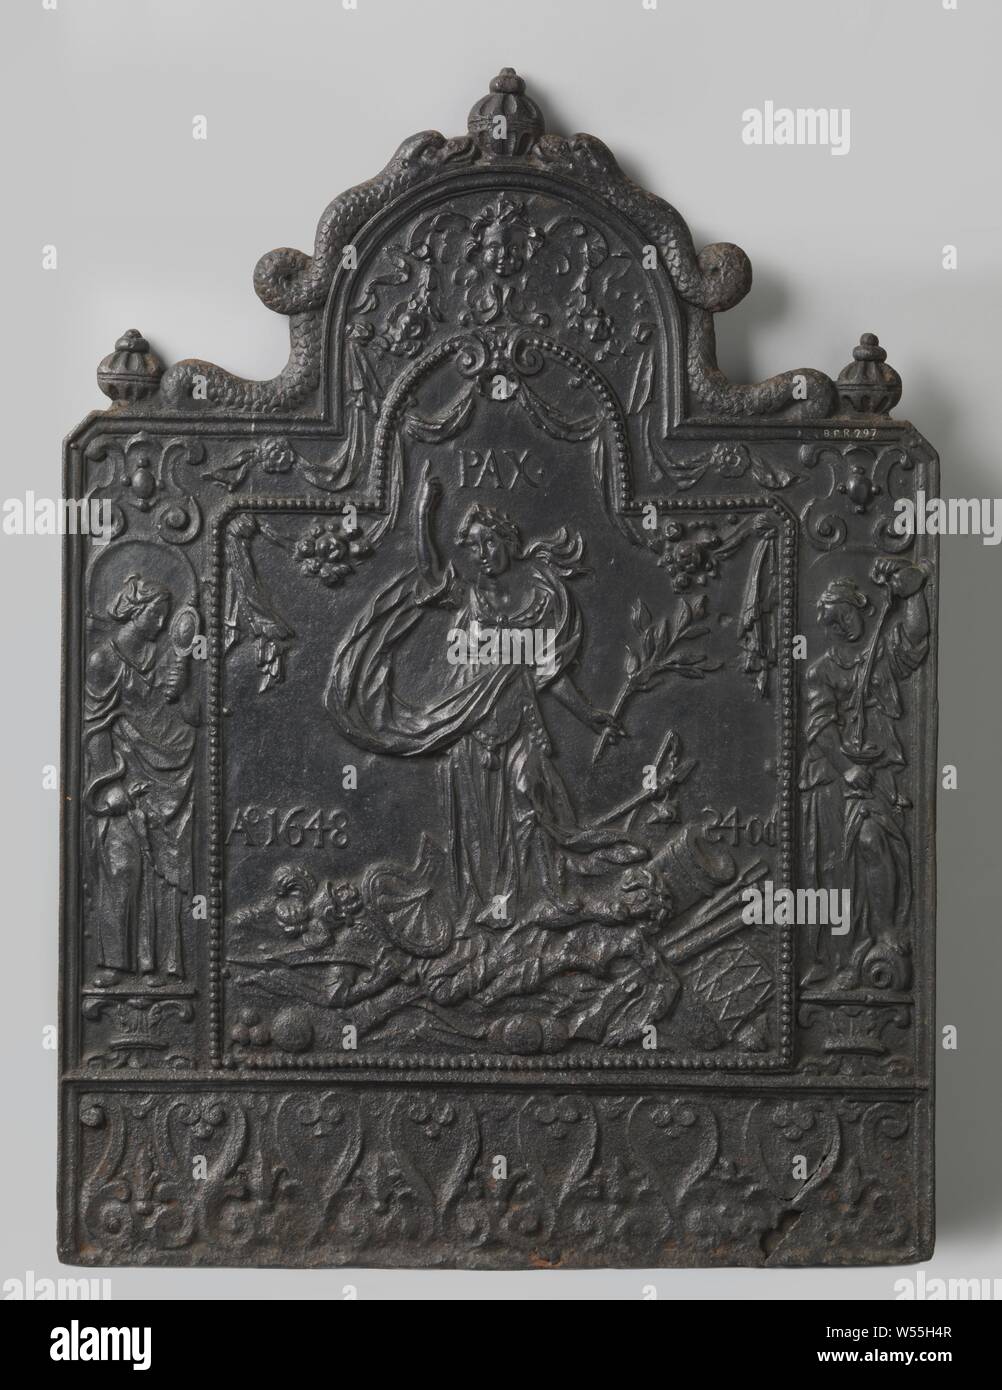 Fire plate with allegory on the Peace of Munster, Fire plate made of cast iron, with a semicircular top. Central is the personification of Peace with a palm branch in her hand, draped above her canvases and the inscription PAX. Peace is on weapons and two men. Immediately next to Peace the inscription Ao 1648 24OC. The whole is framed with a border, decorated with a pearl border and a virtue on either side: left Prudentia with mirror and snake in the hands, right Temperantia with tazza and jug. At the top an angel's head amidst fruits, at the bottom mirrored S-volutes. The top is crowned Stock Photo